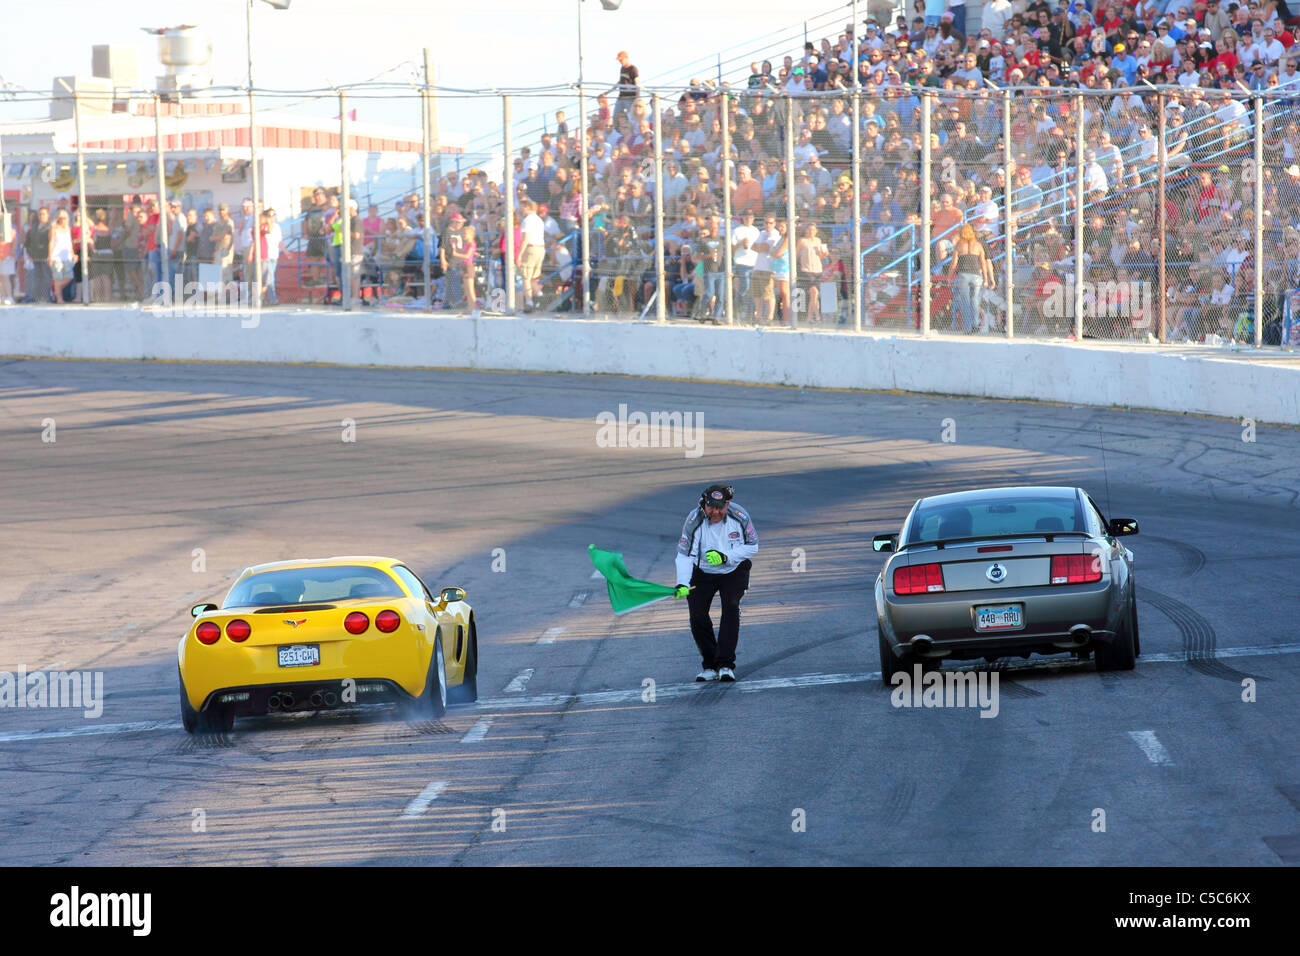 Denver, Colorado - A Ford Mustang and a Chevrolet Corvette are signaled to start the private citizen drag race. Stock Photo